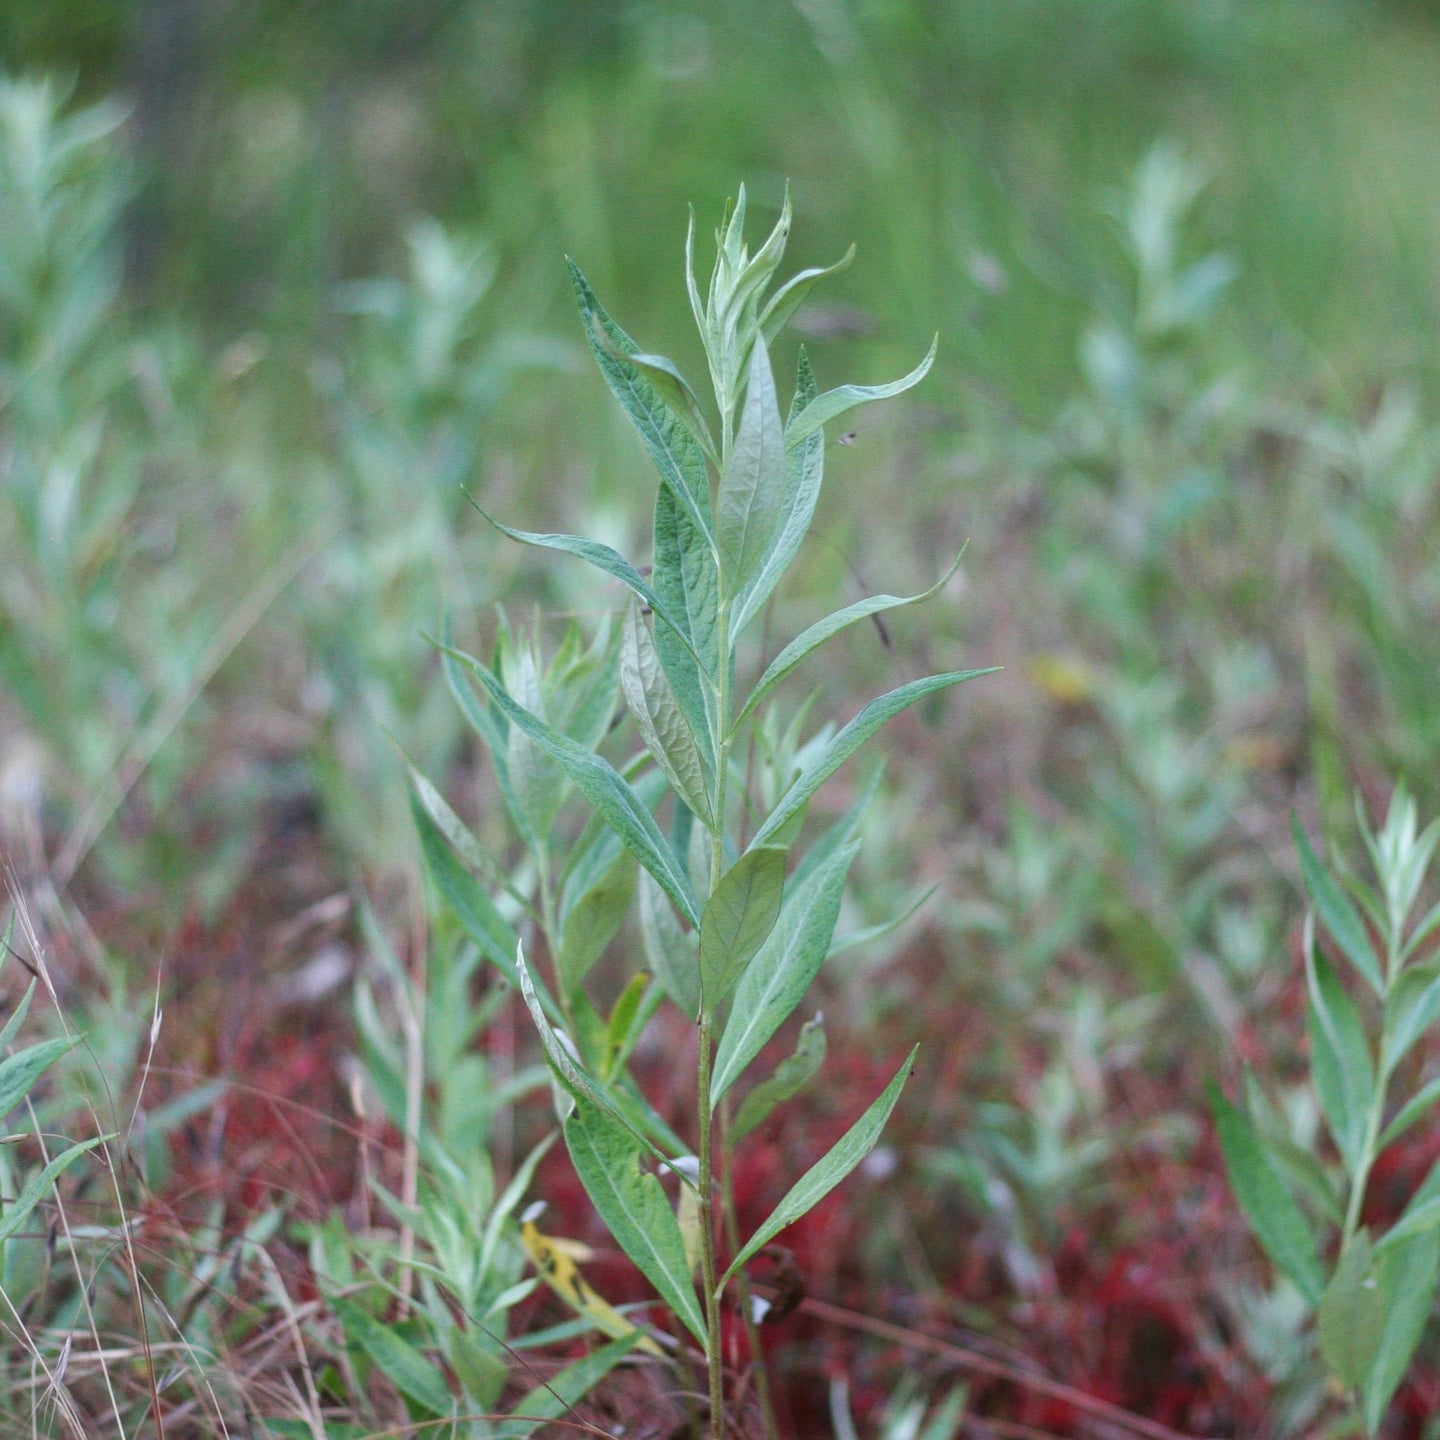 A young Douglas' sagewort (Artemisia douglasiana) plant. One of approximately 200 species of Pacific Northwest native plants available at Sparrowhawk Native Plants, Native Plant Nursery in Portland, Oregon.